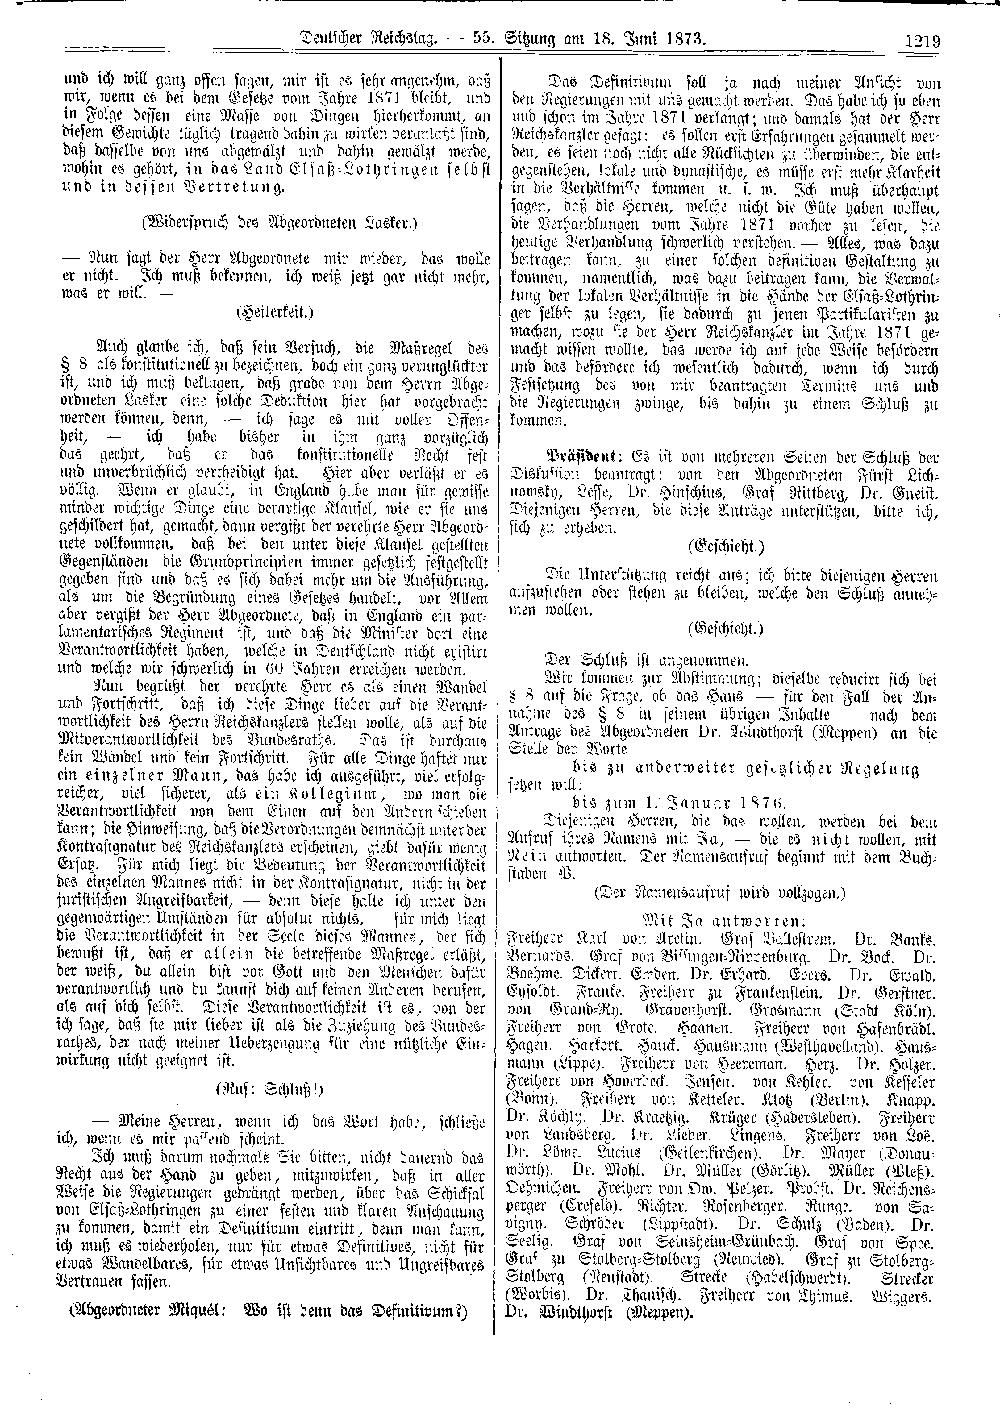 Scan of page 1219